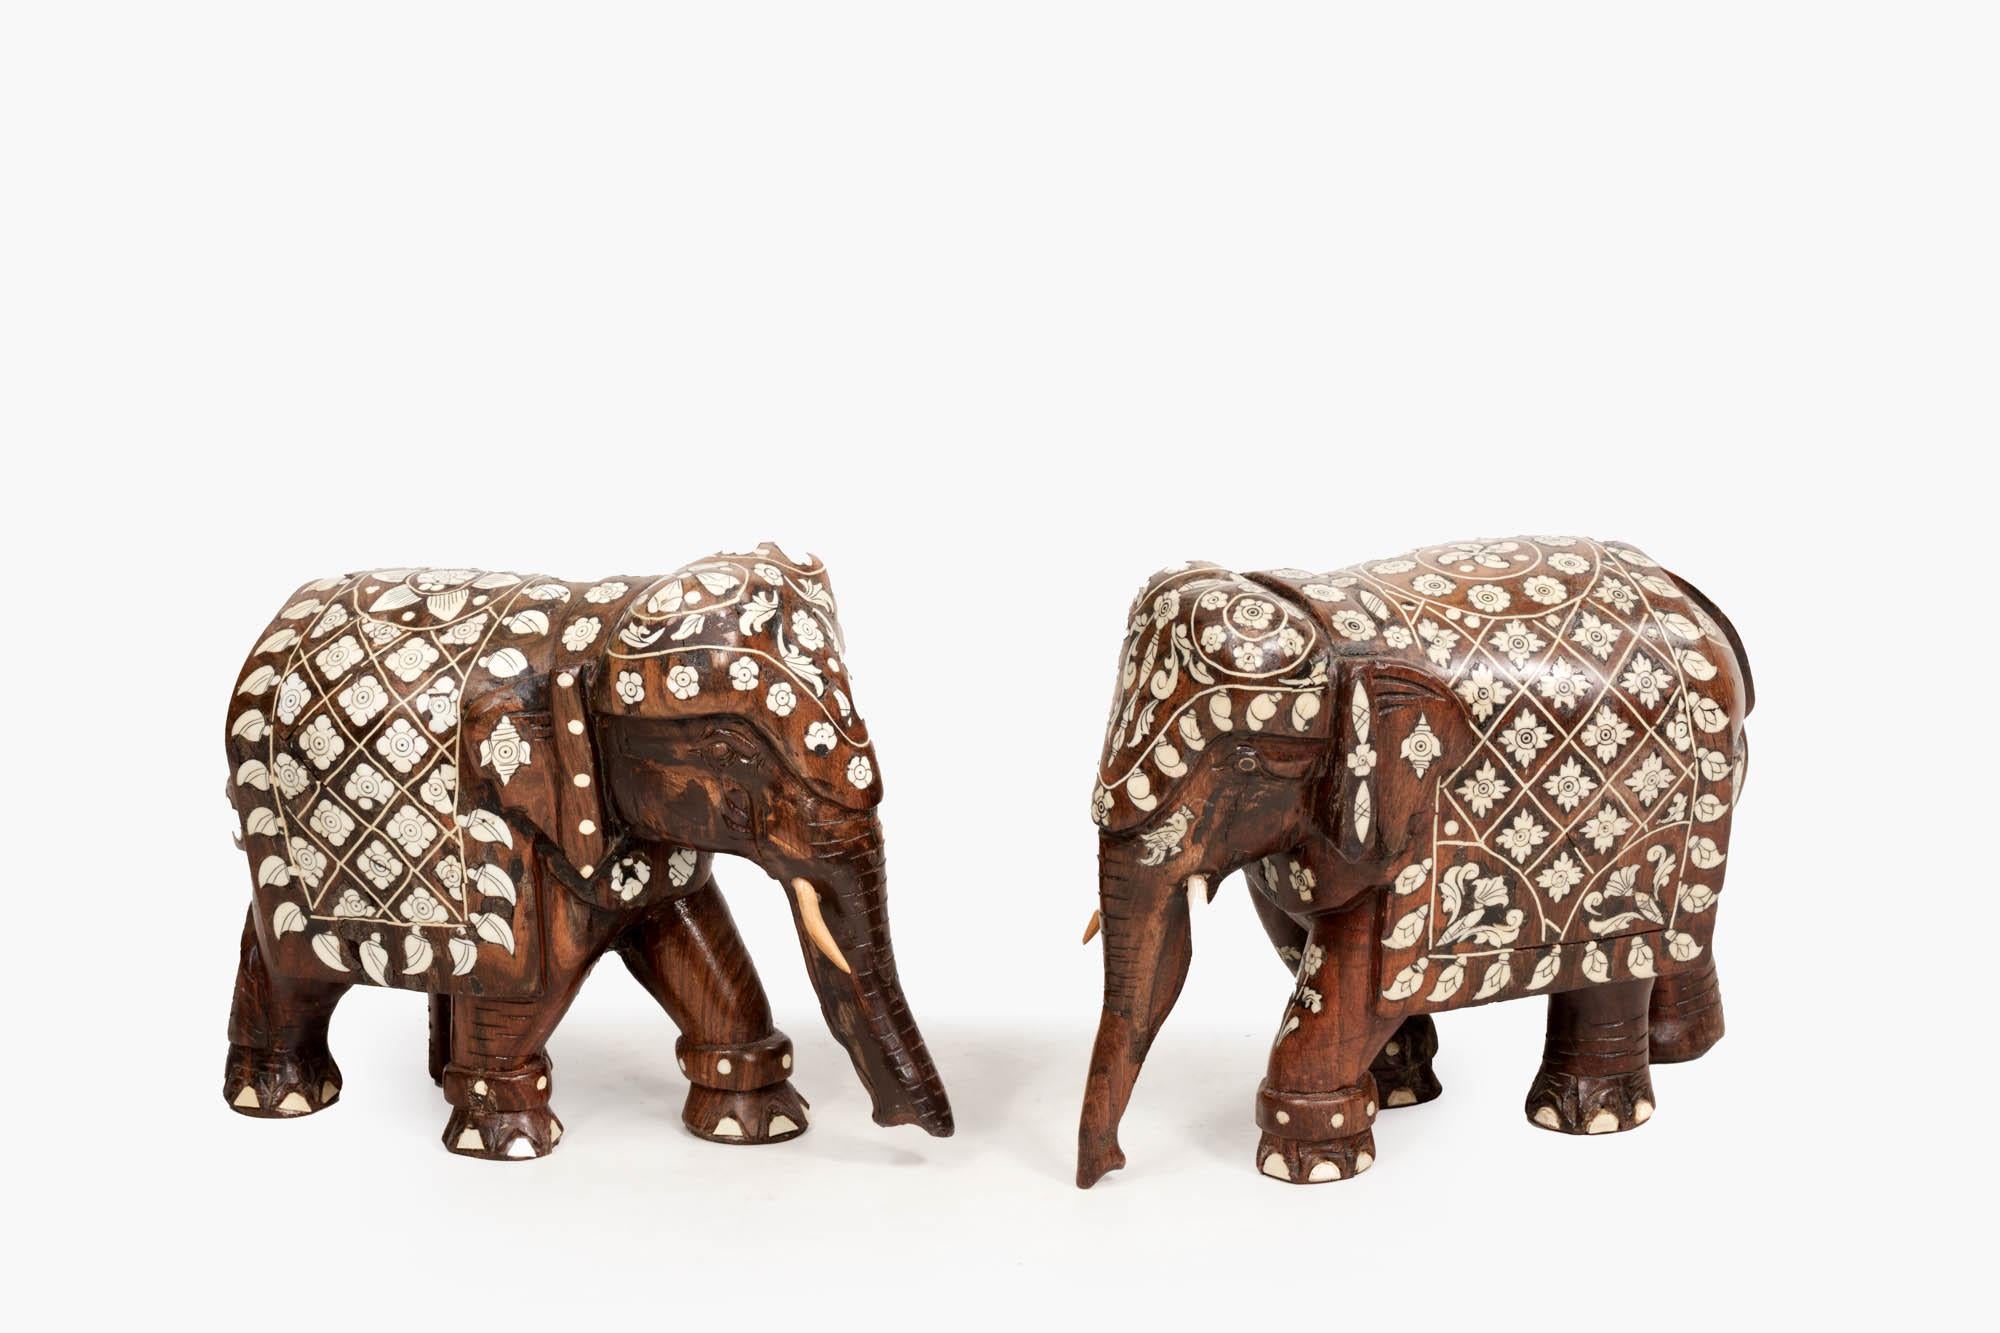 19th Century pair Anglo-Indian carved rosewood elephant statues with bone inlay. The pair are hand carved and profusely inlaid throughout with intricate bone detail.